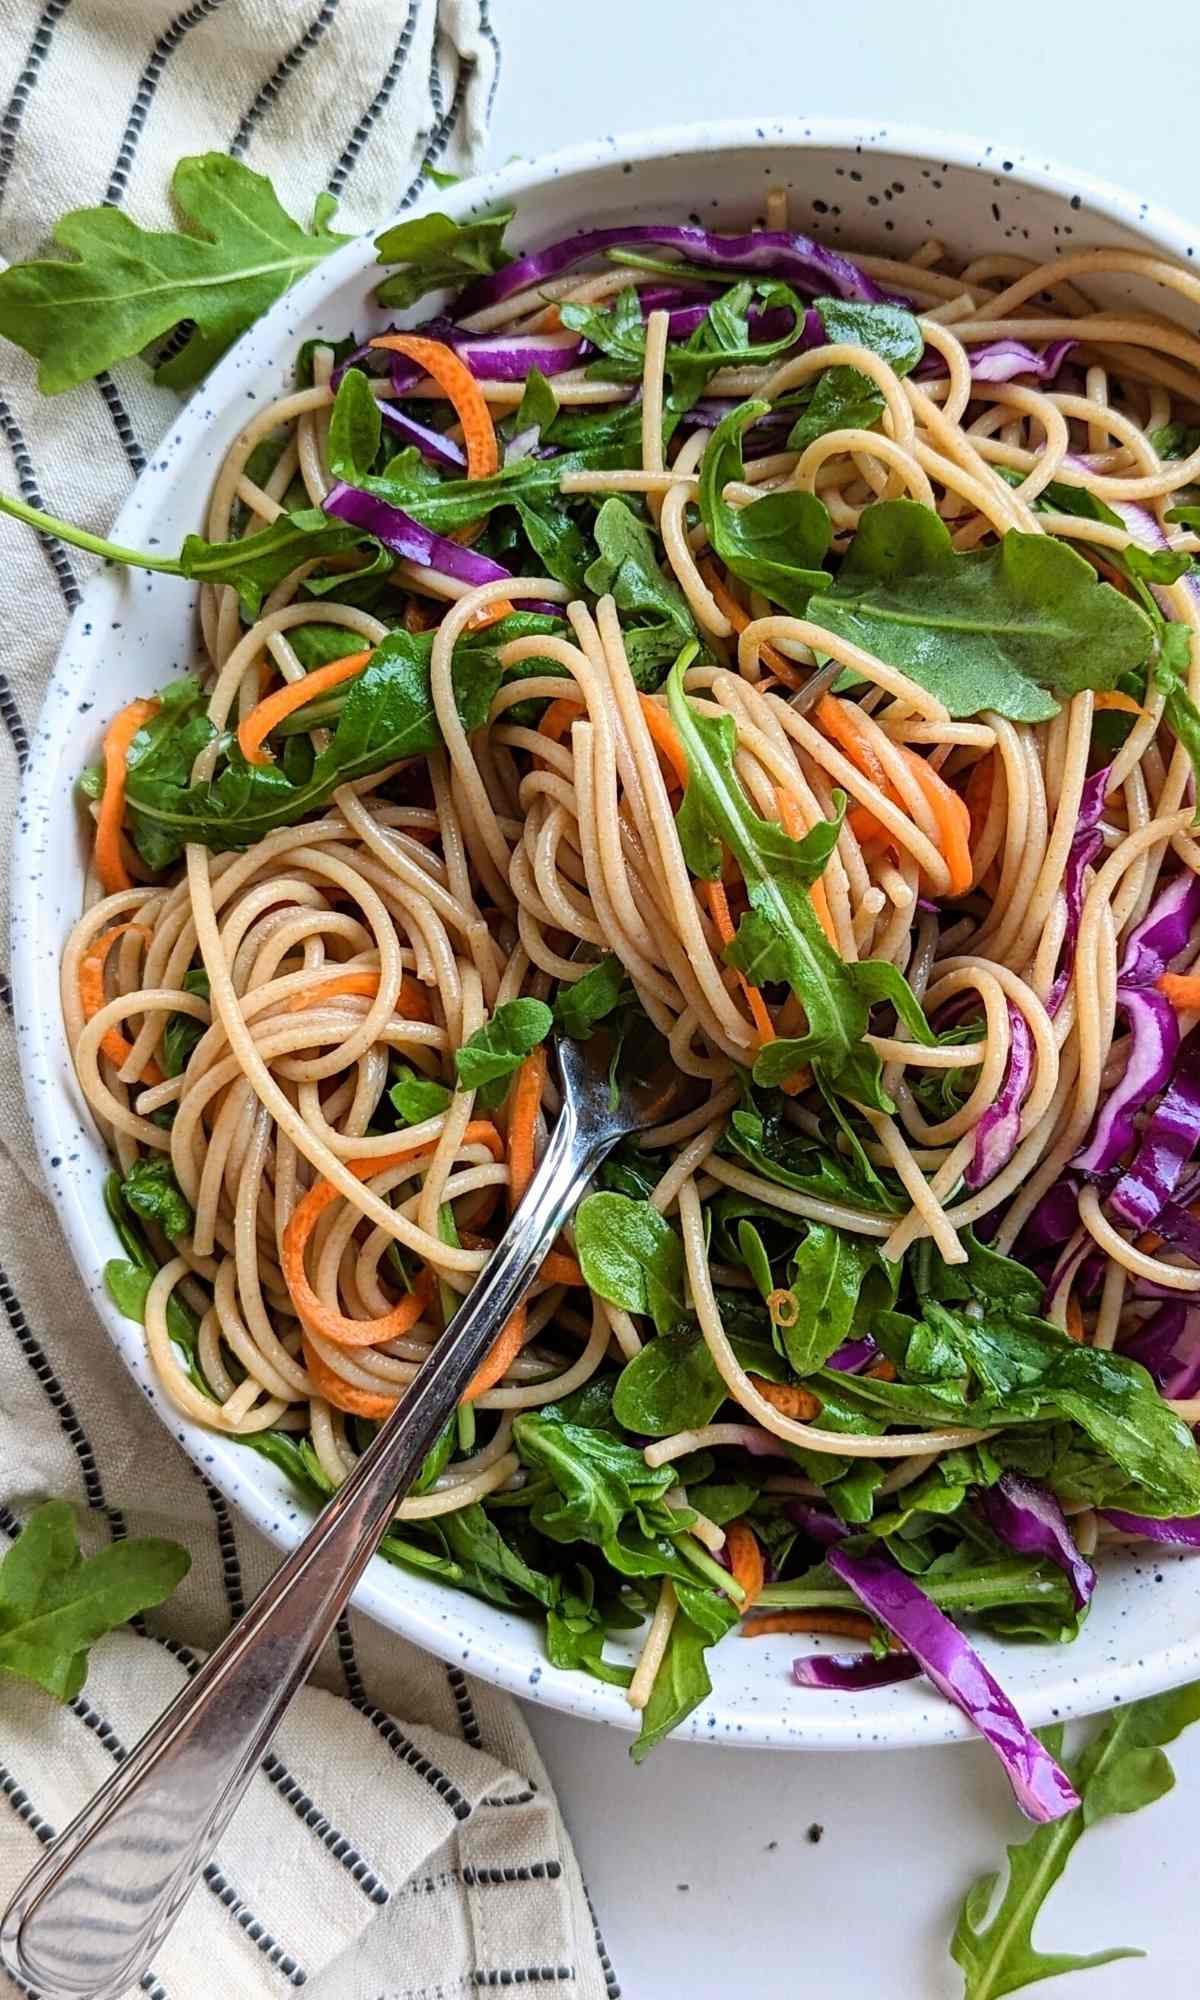 pasta salad with leafy greens recipes easy summer pasta salad recipes without meat arugula recipes for dinner arugula appetizers and arugula salads.